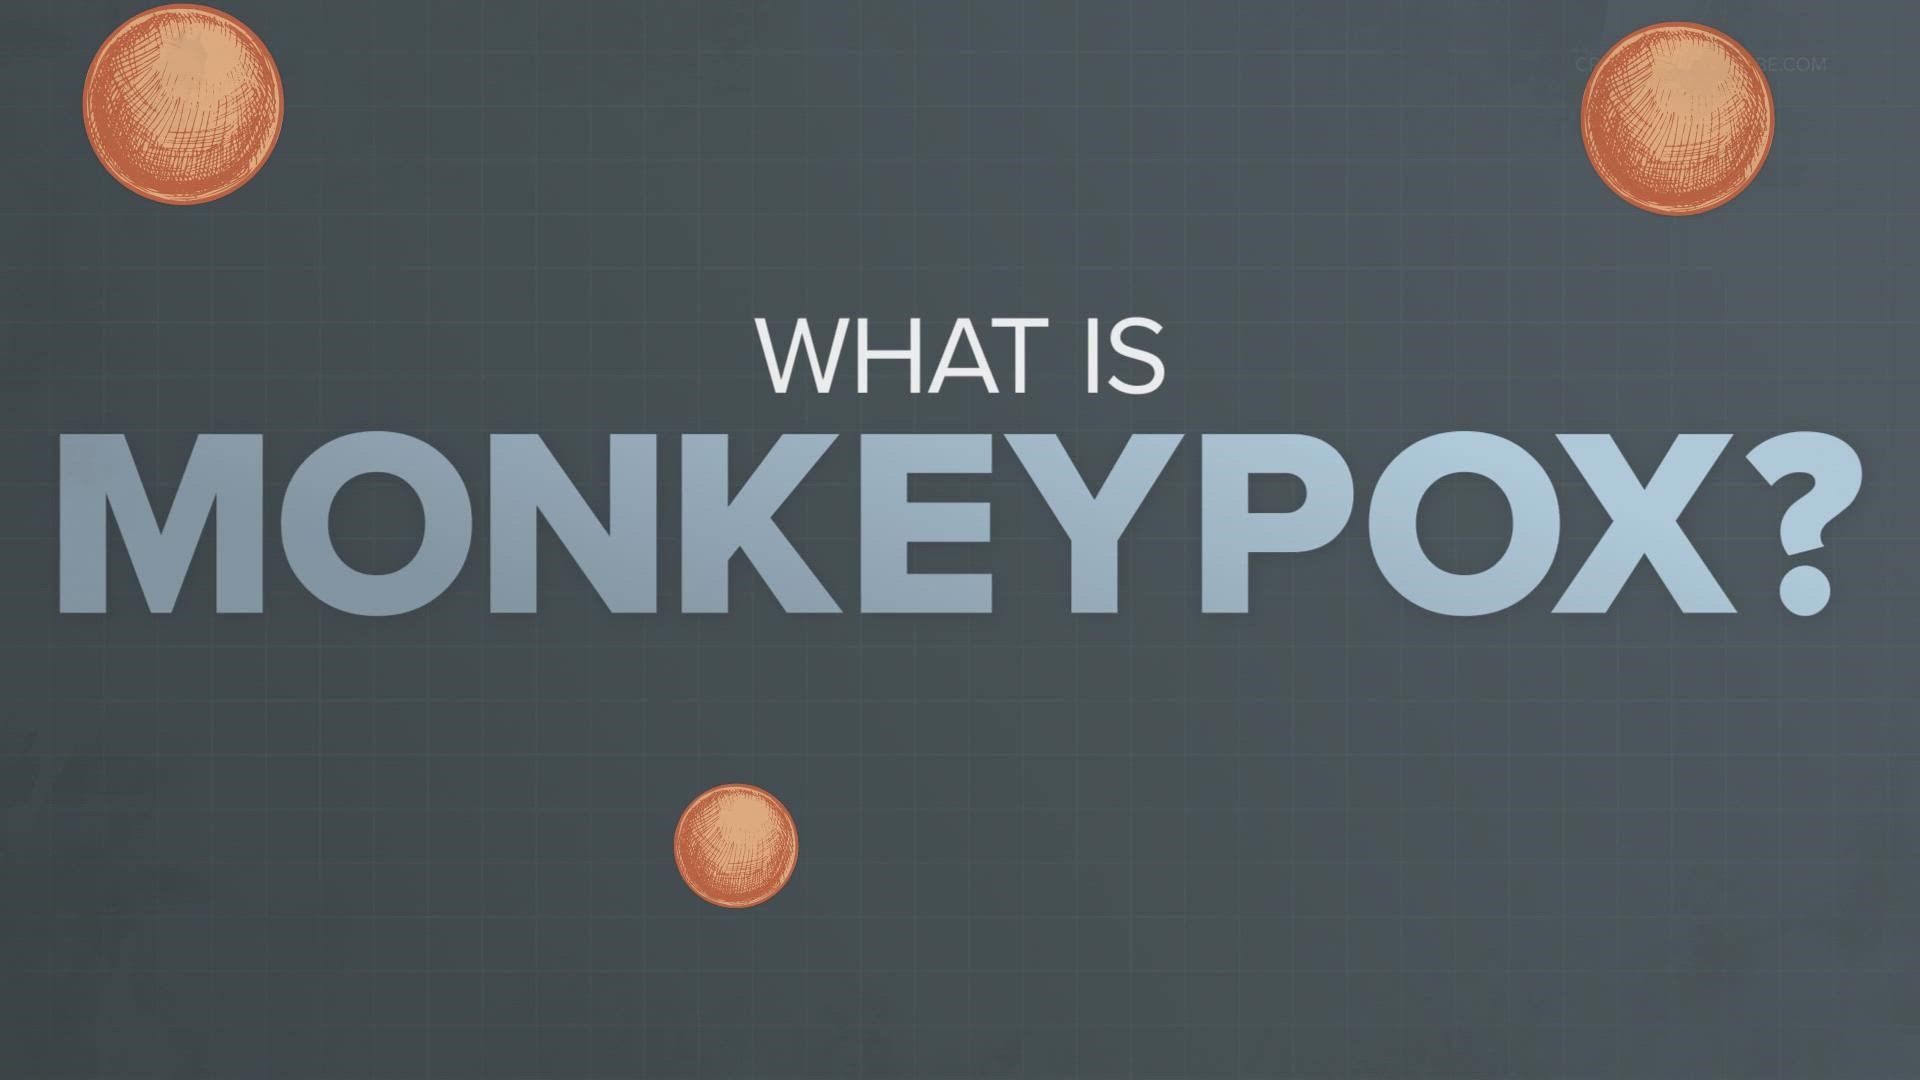 Monkeypox continues to spread in Texas, but what is it? We explain.